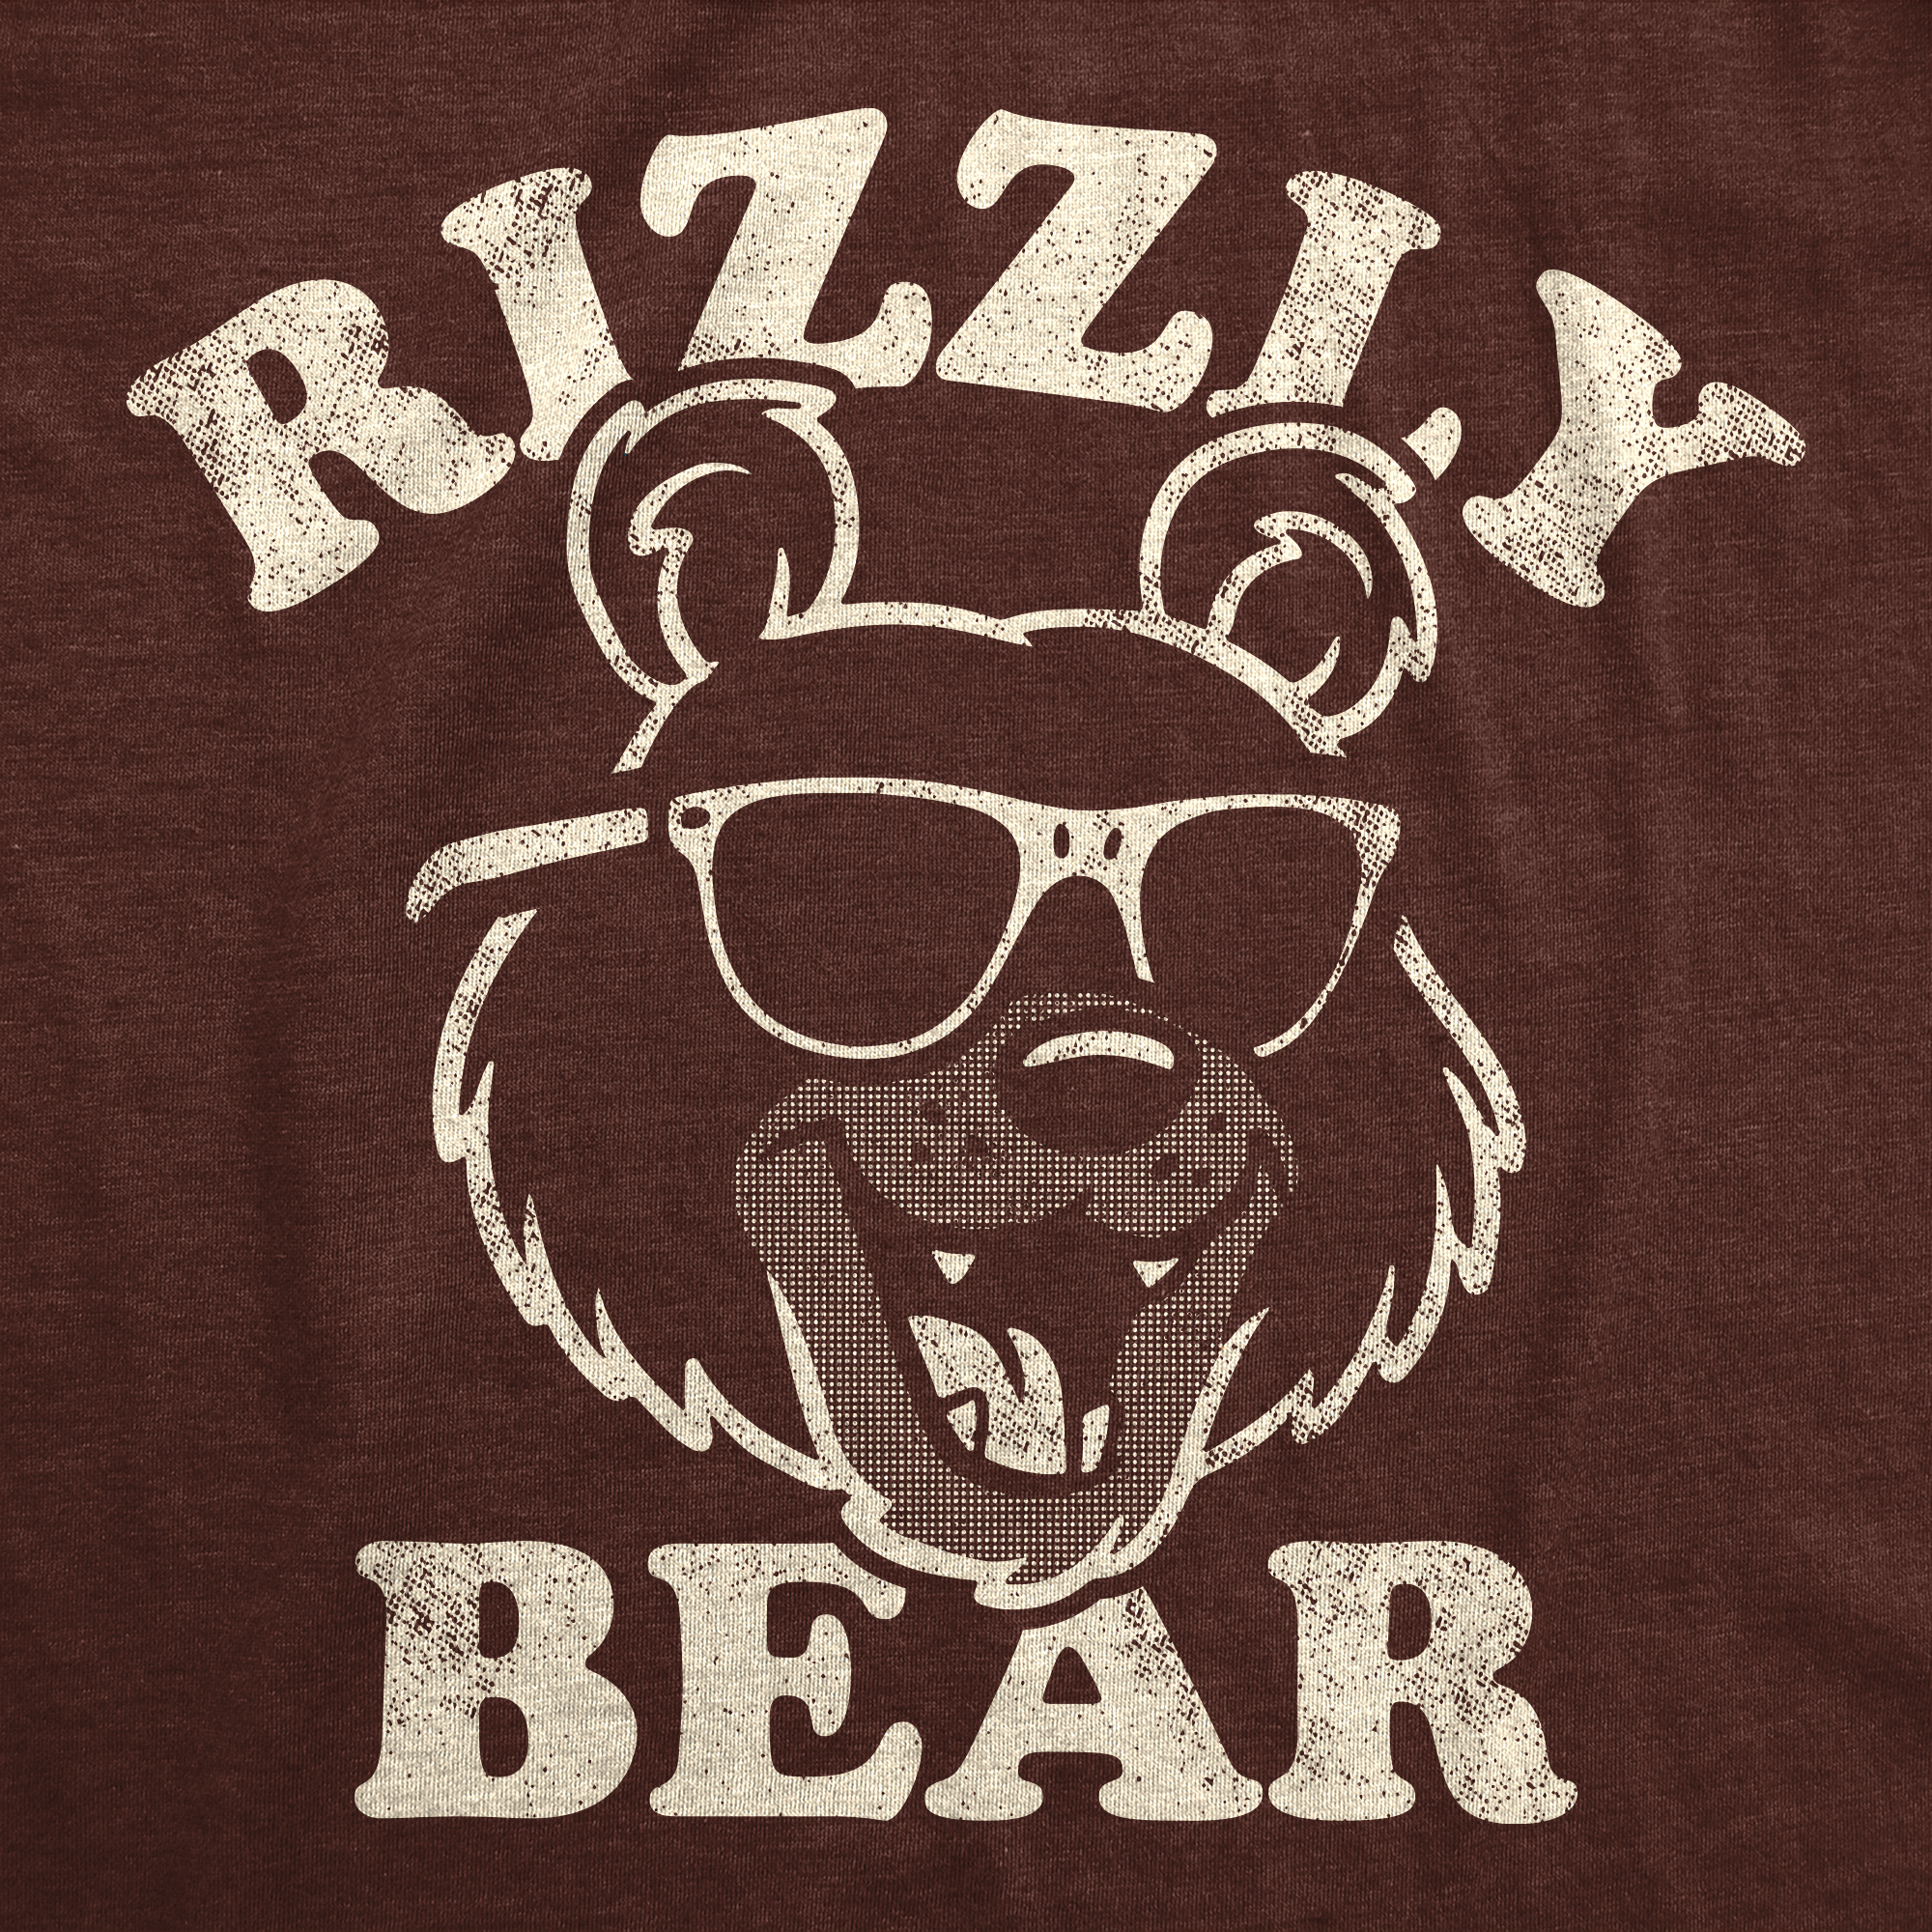 Funny Heather Brown - Rizzly Bear Rizzly Bear Mens T Shirt Nerdy sarcastic animal Tee